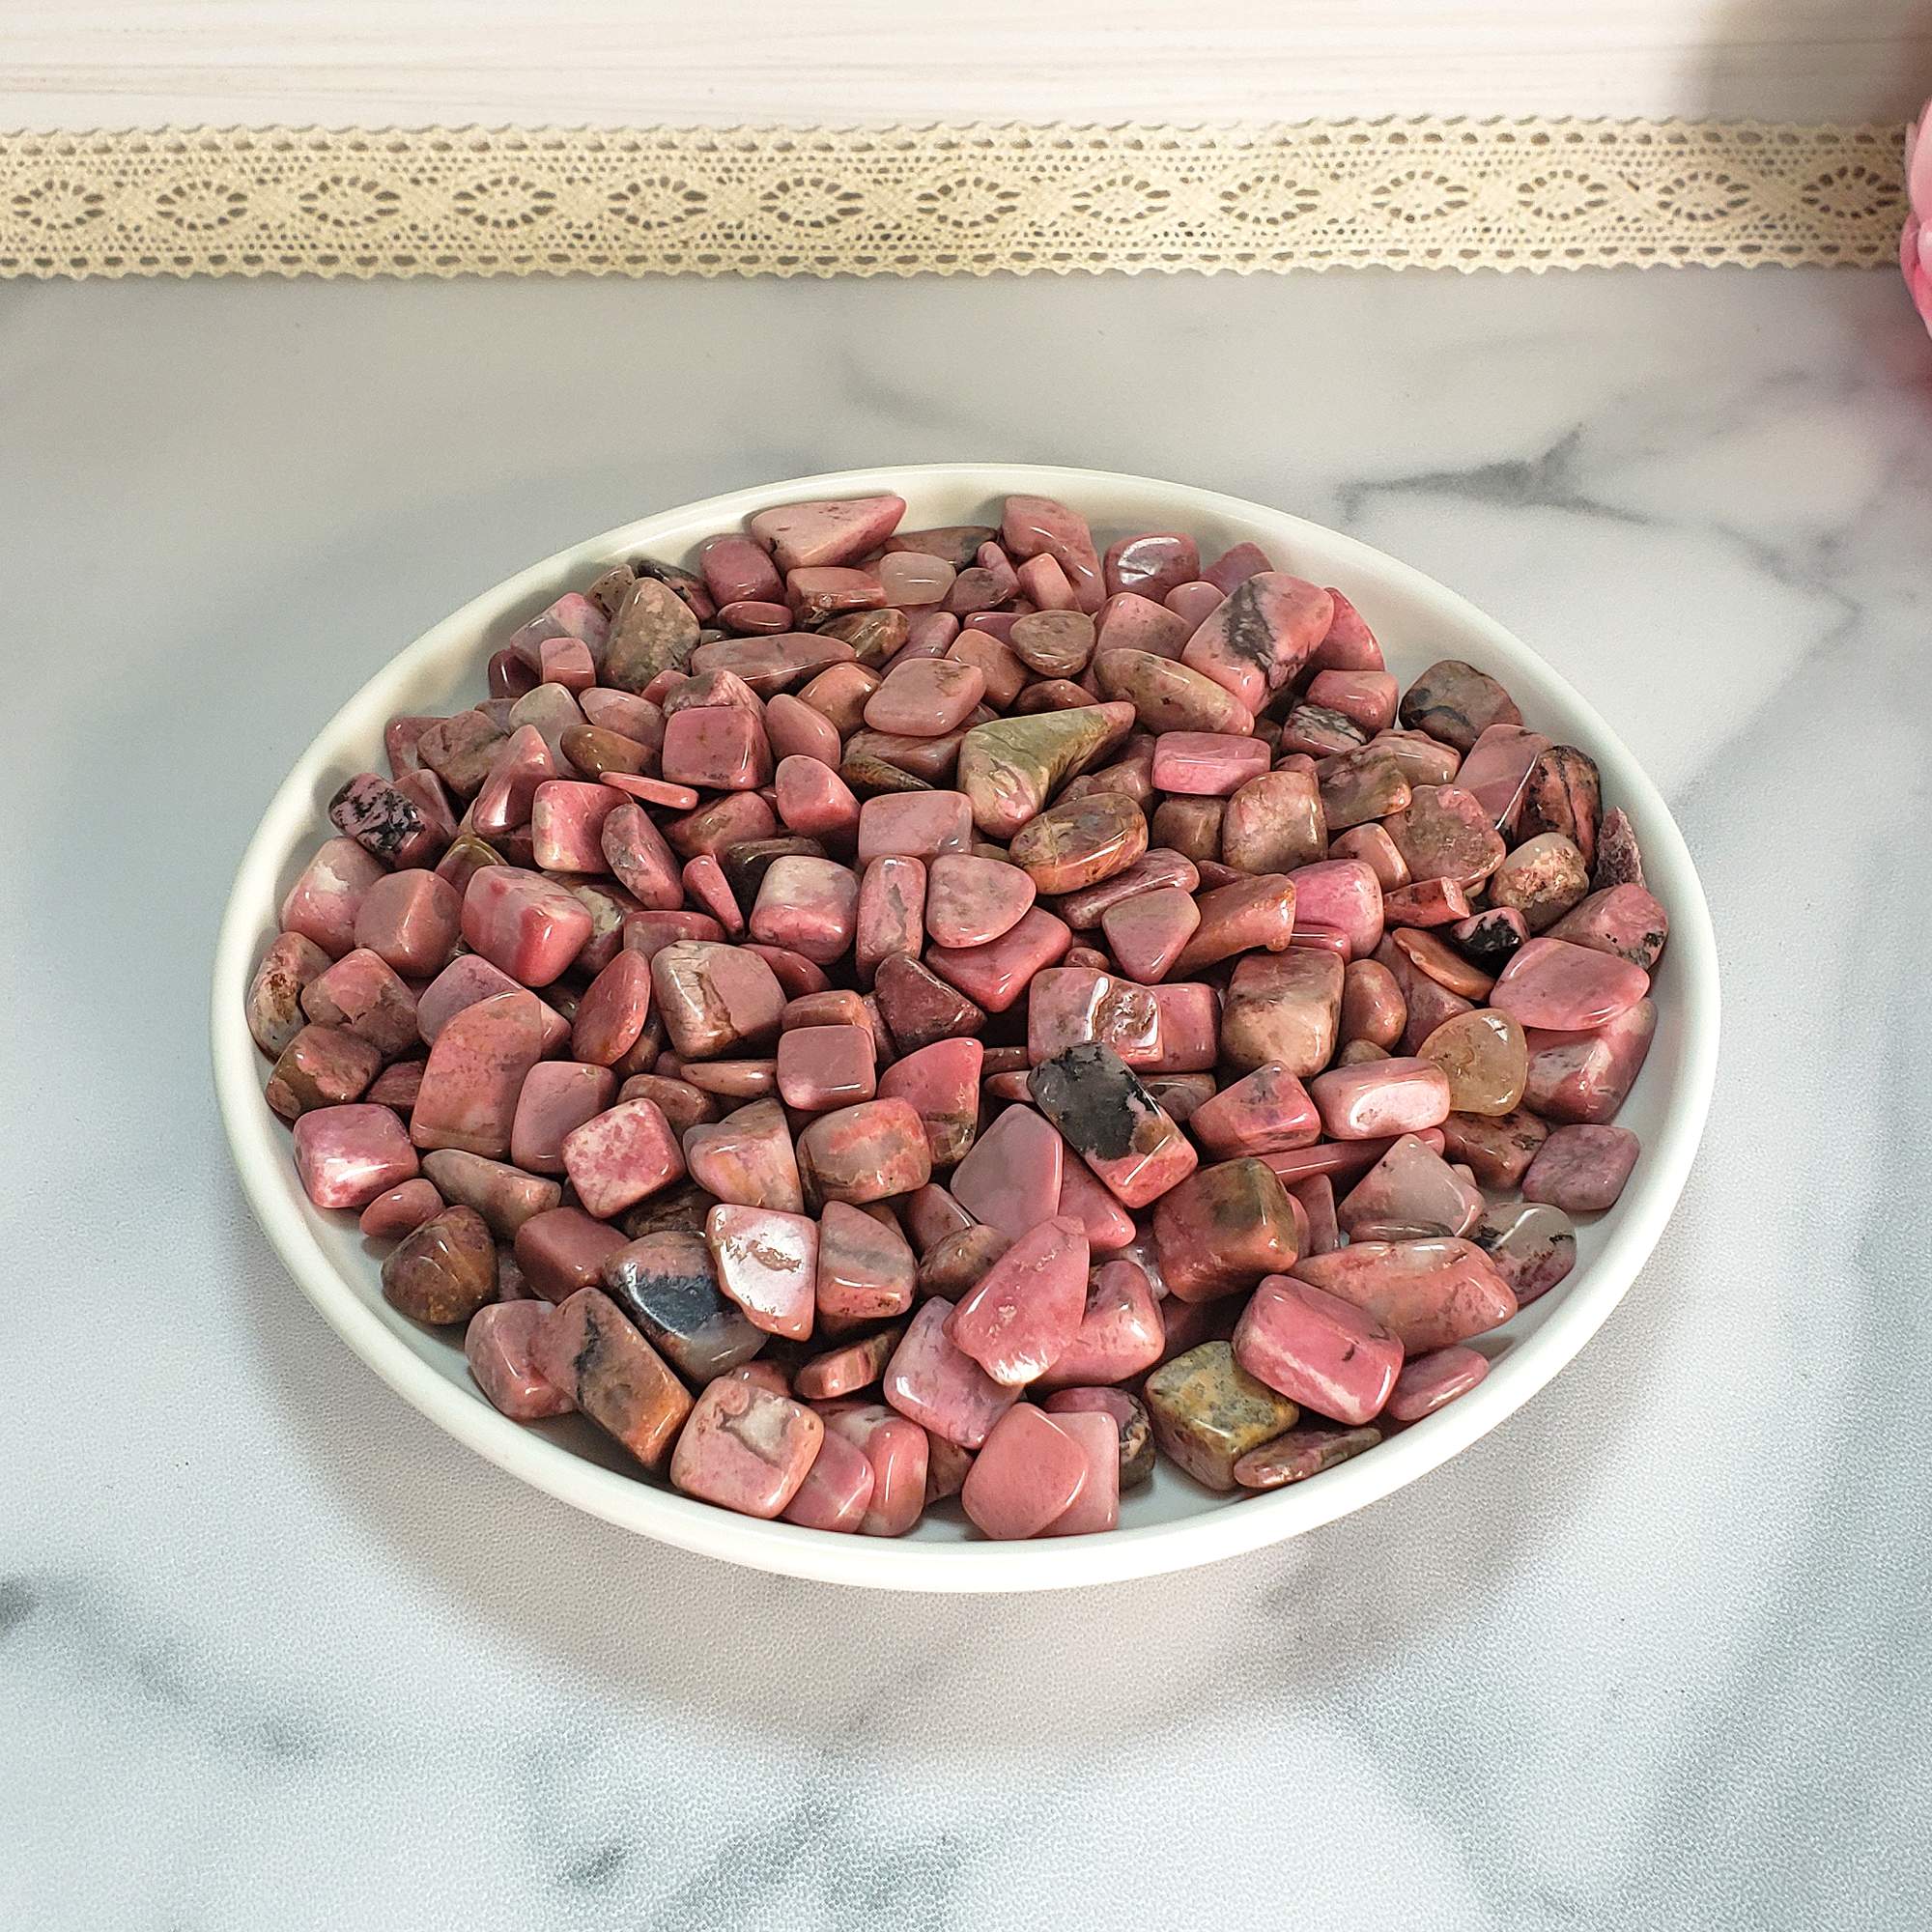 Rhodonite Crystal Pebbles Natural Gemstone Chips By the Ounce - Rhodonite Stone Chips in White Ceramic Bowl